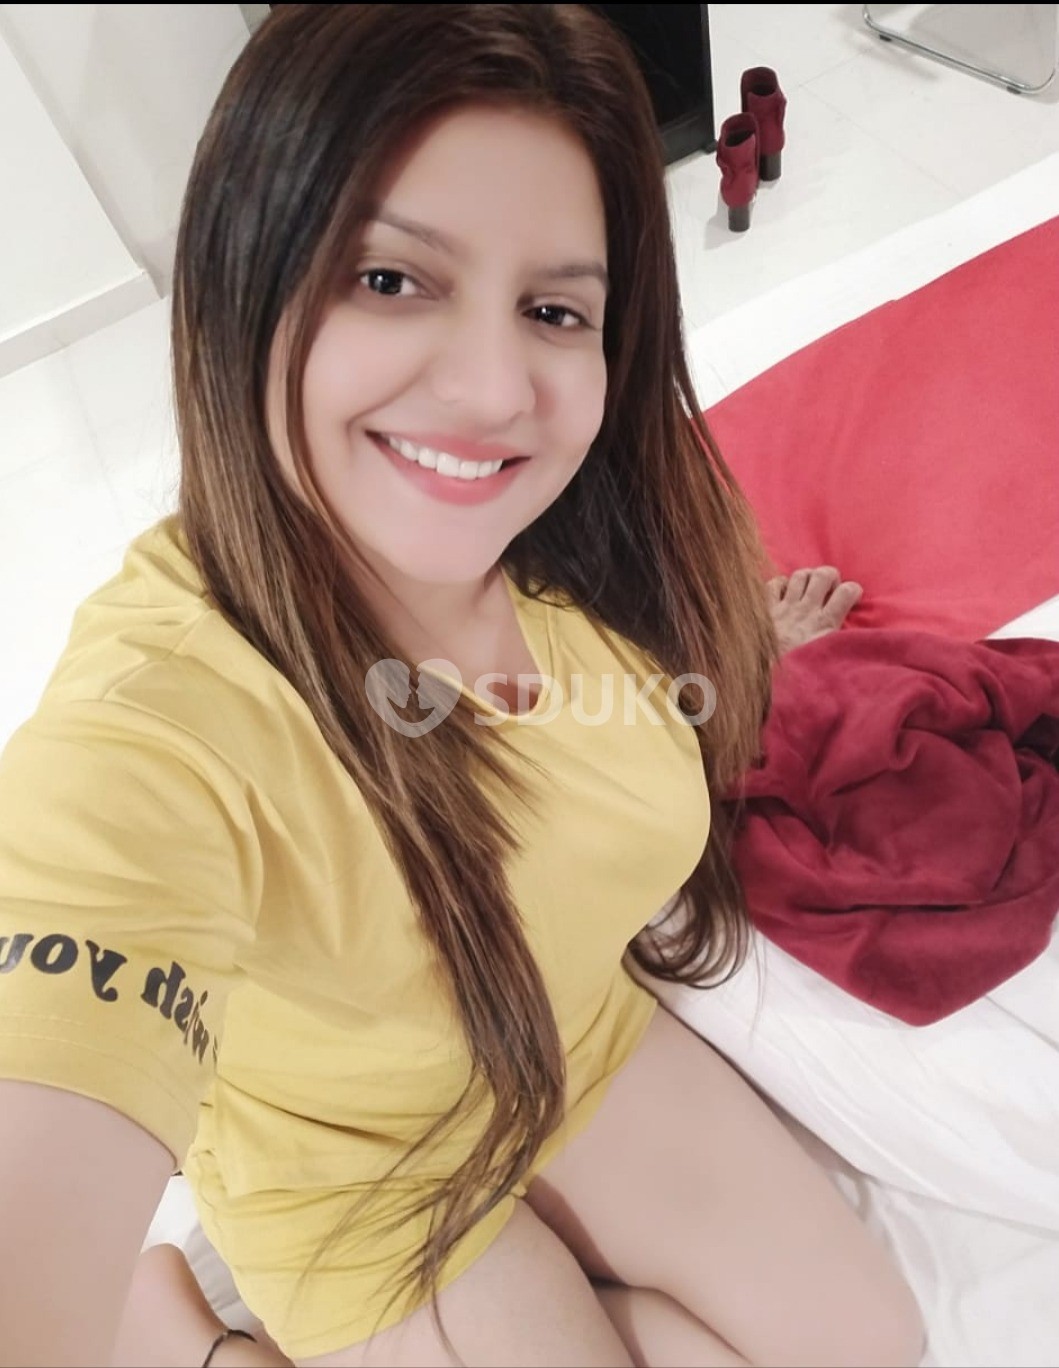 KOREGAON PARK HOT AND HIGH PROFILE VIP CALL 24 X 7 HRS AVAILABLE  ANAL ORAL BLOWJOB AVAILABLE ANYTIME CALL ME